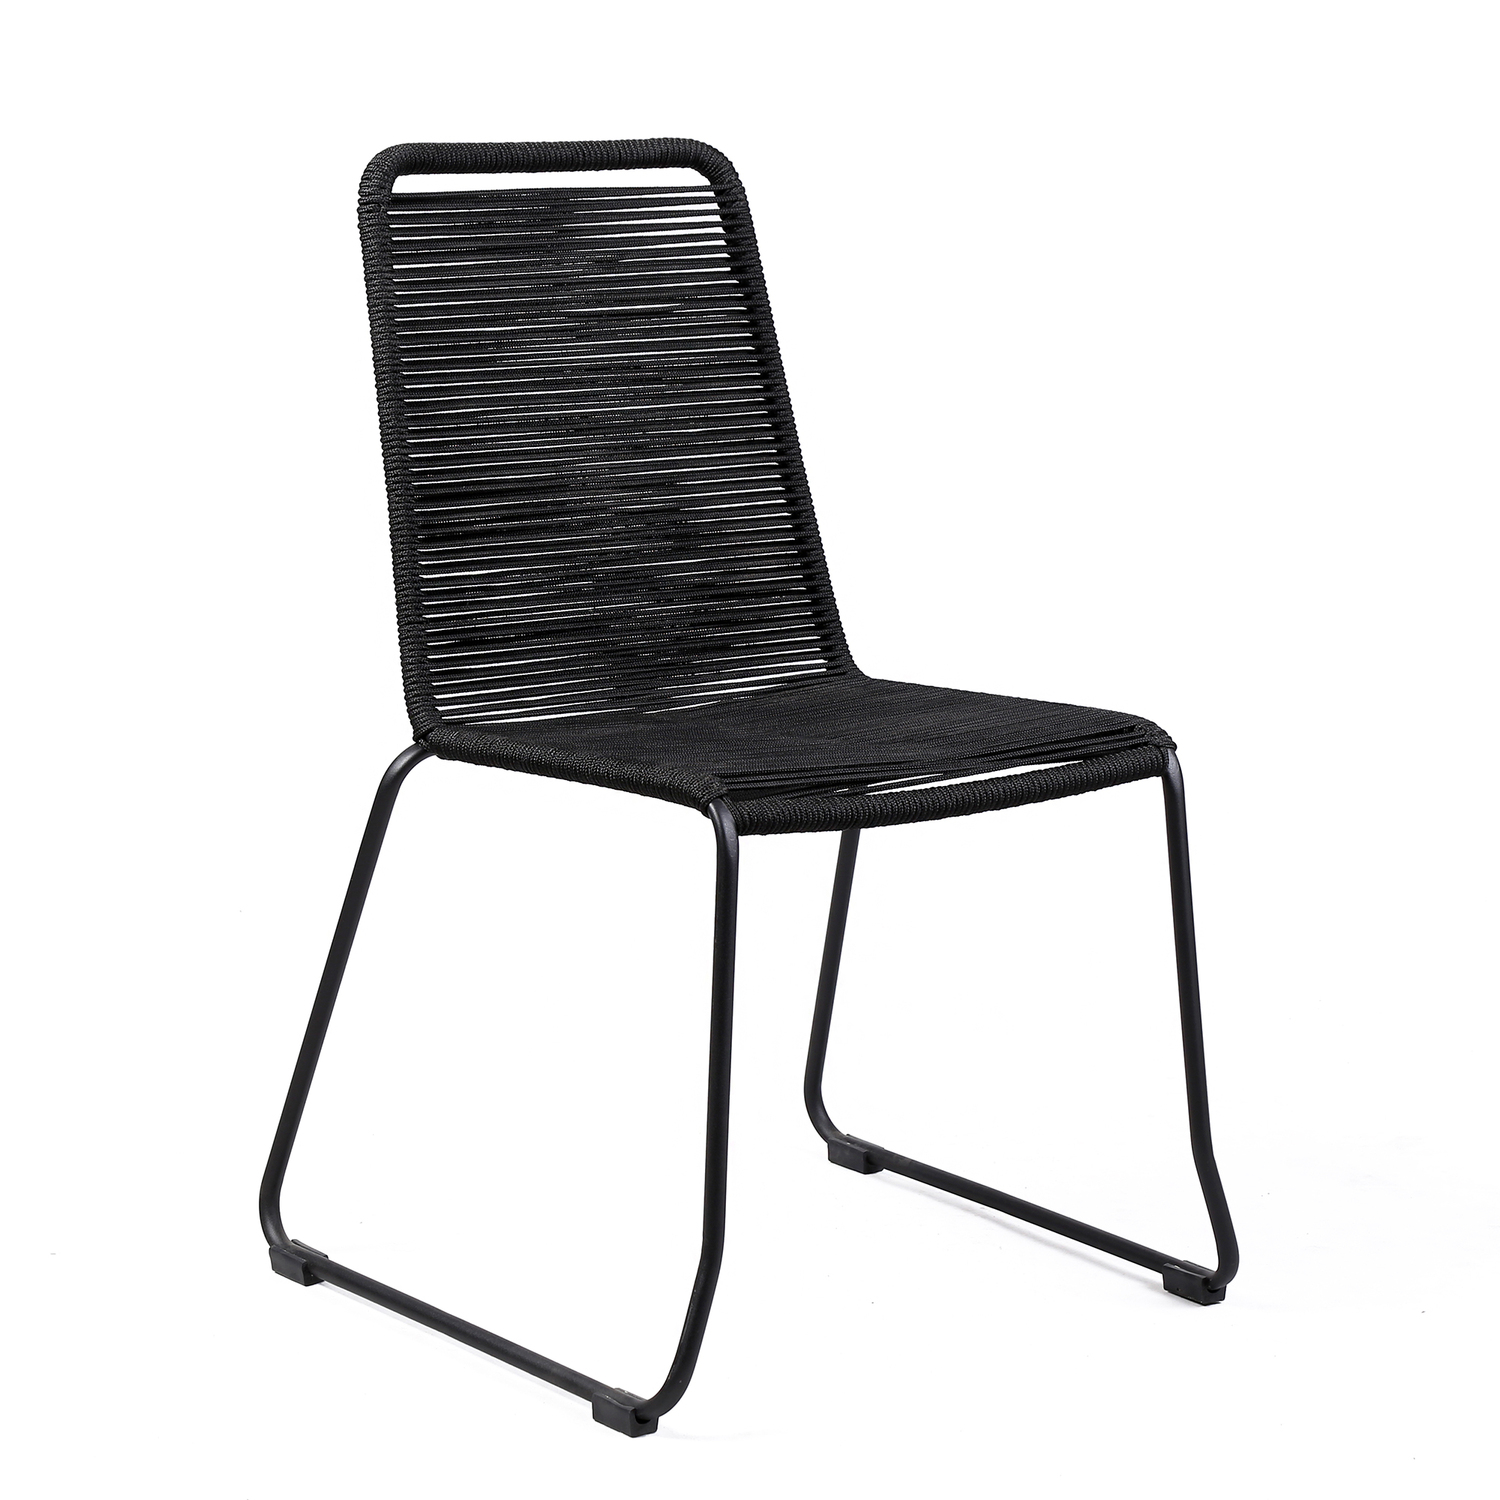 Armen Living Shasta 18.5" Fabric Patio Dining Chair in Black (Set of 2) - image 2 of 8